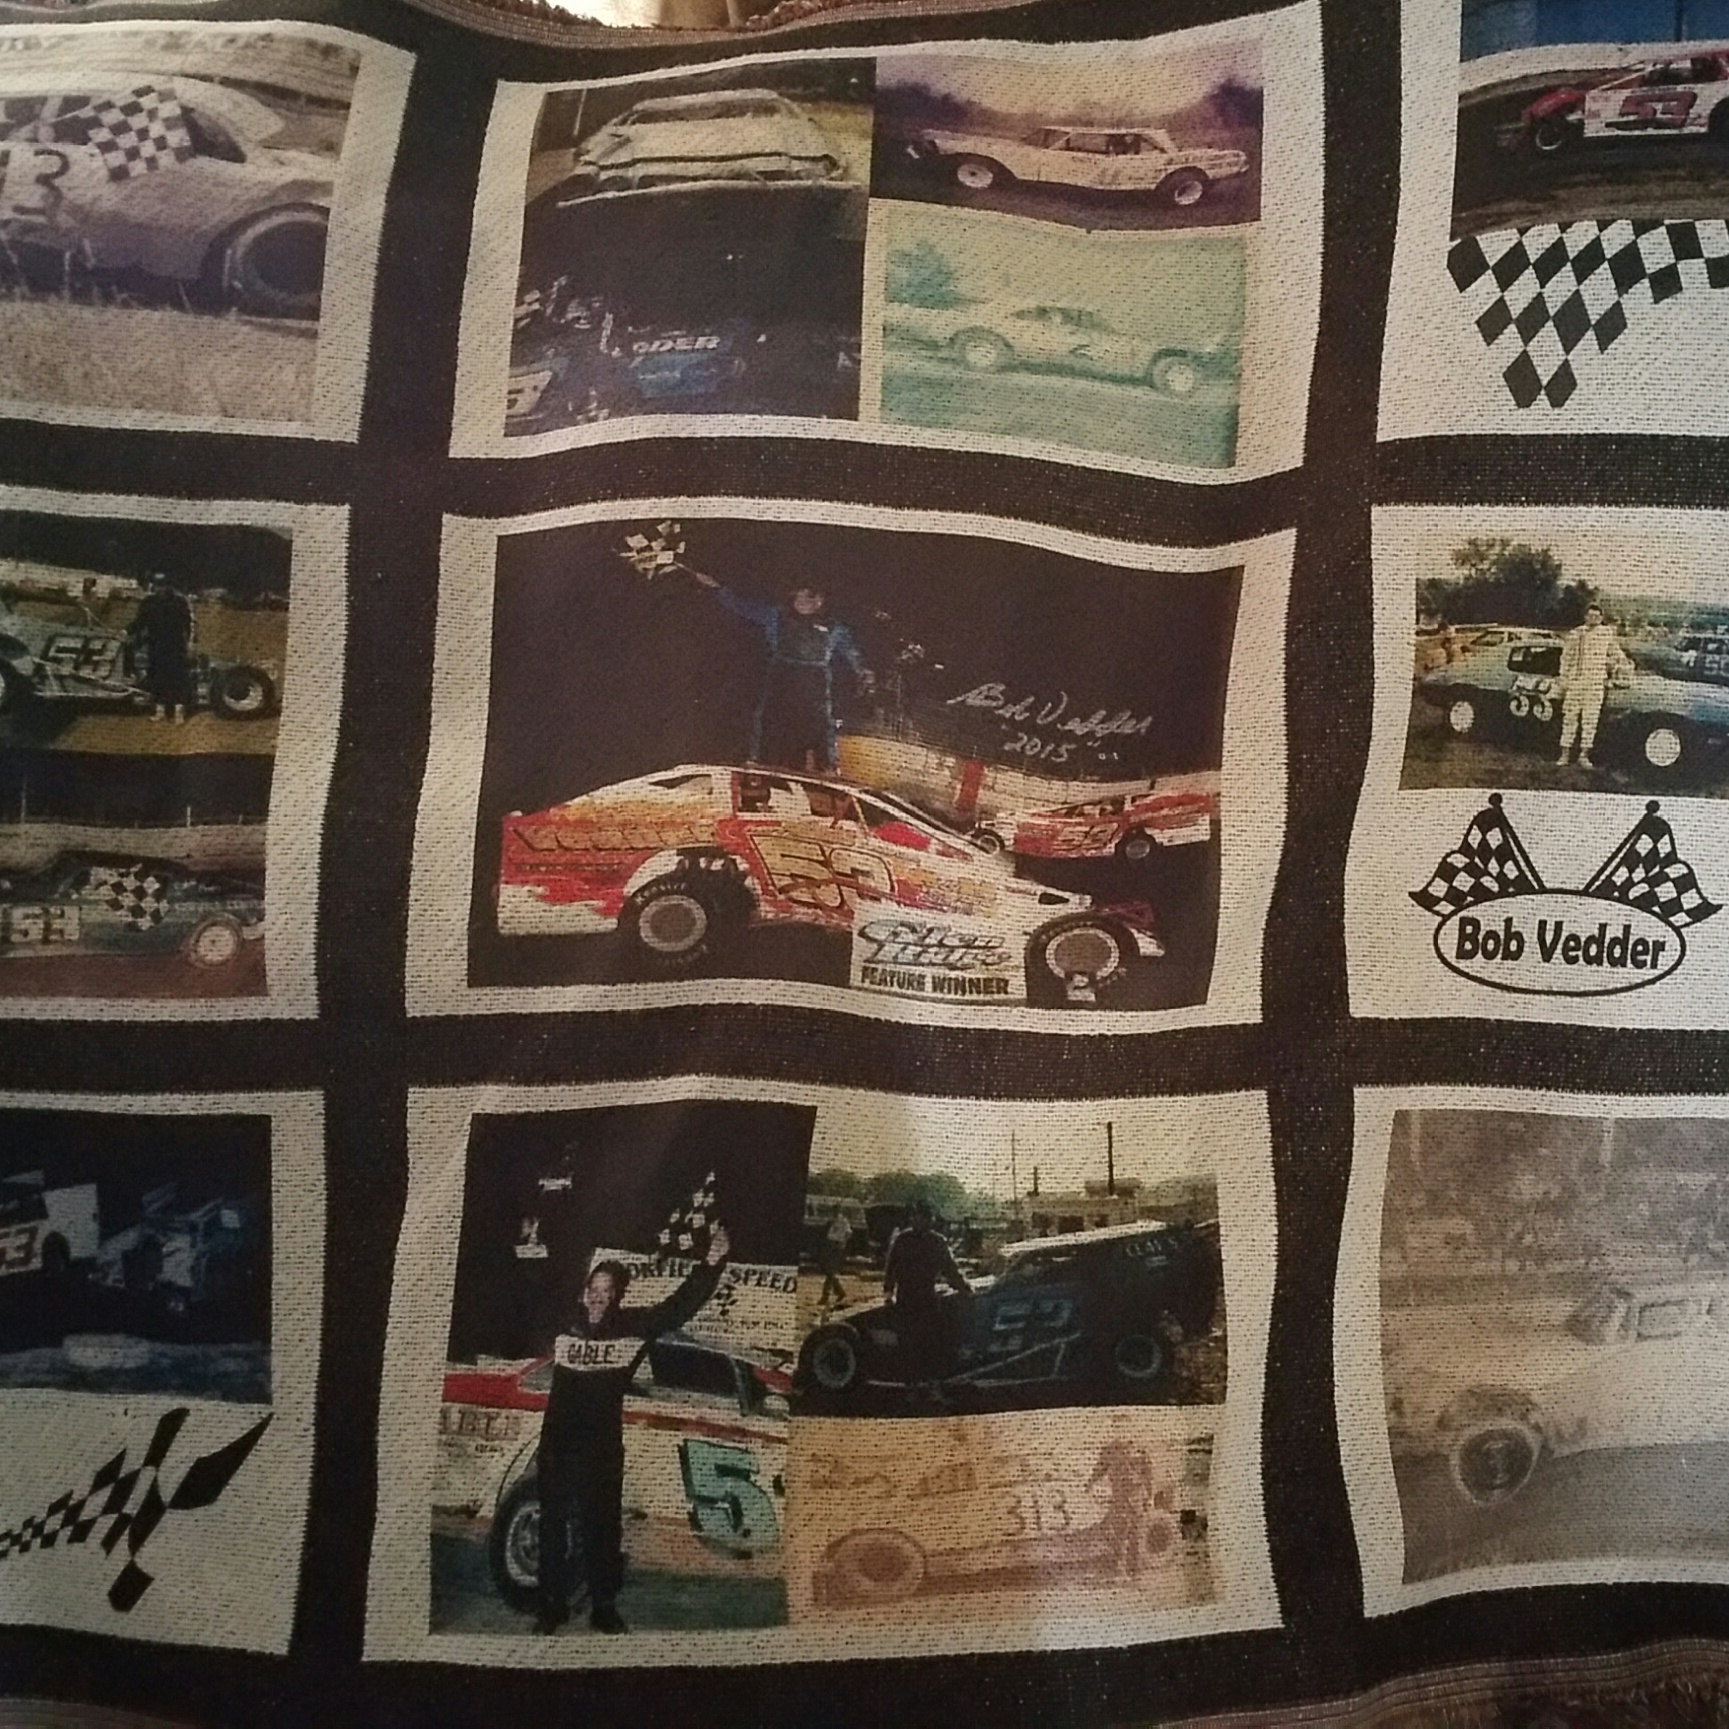 Racing Memories made with sublimation printing